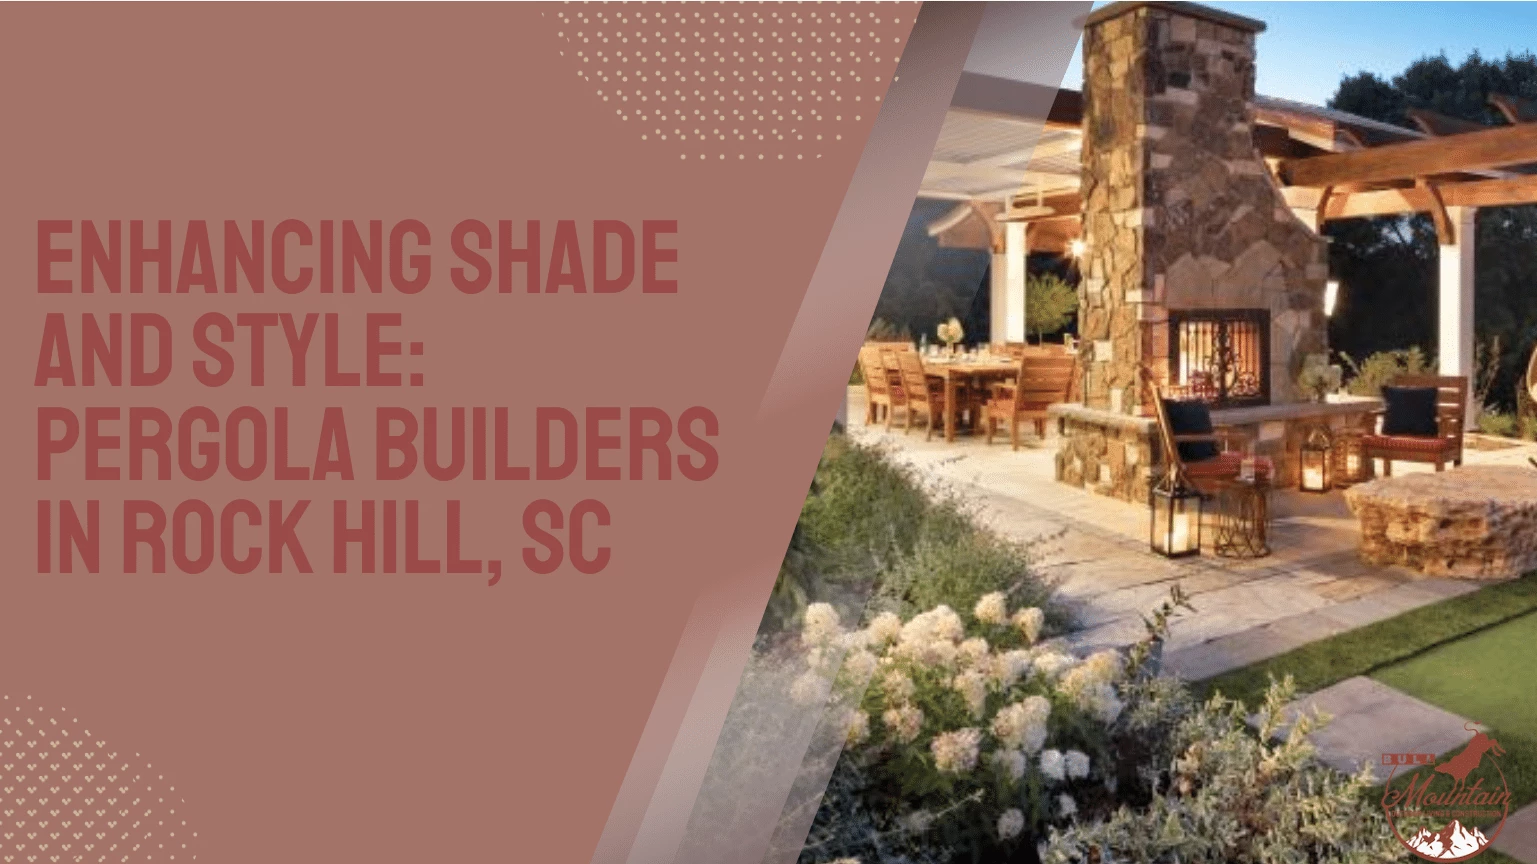 Enhancing Shade and Style Pergola Builders in Rock Hill, SC